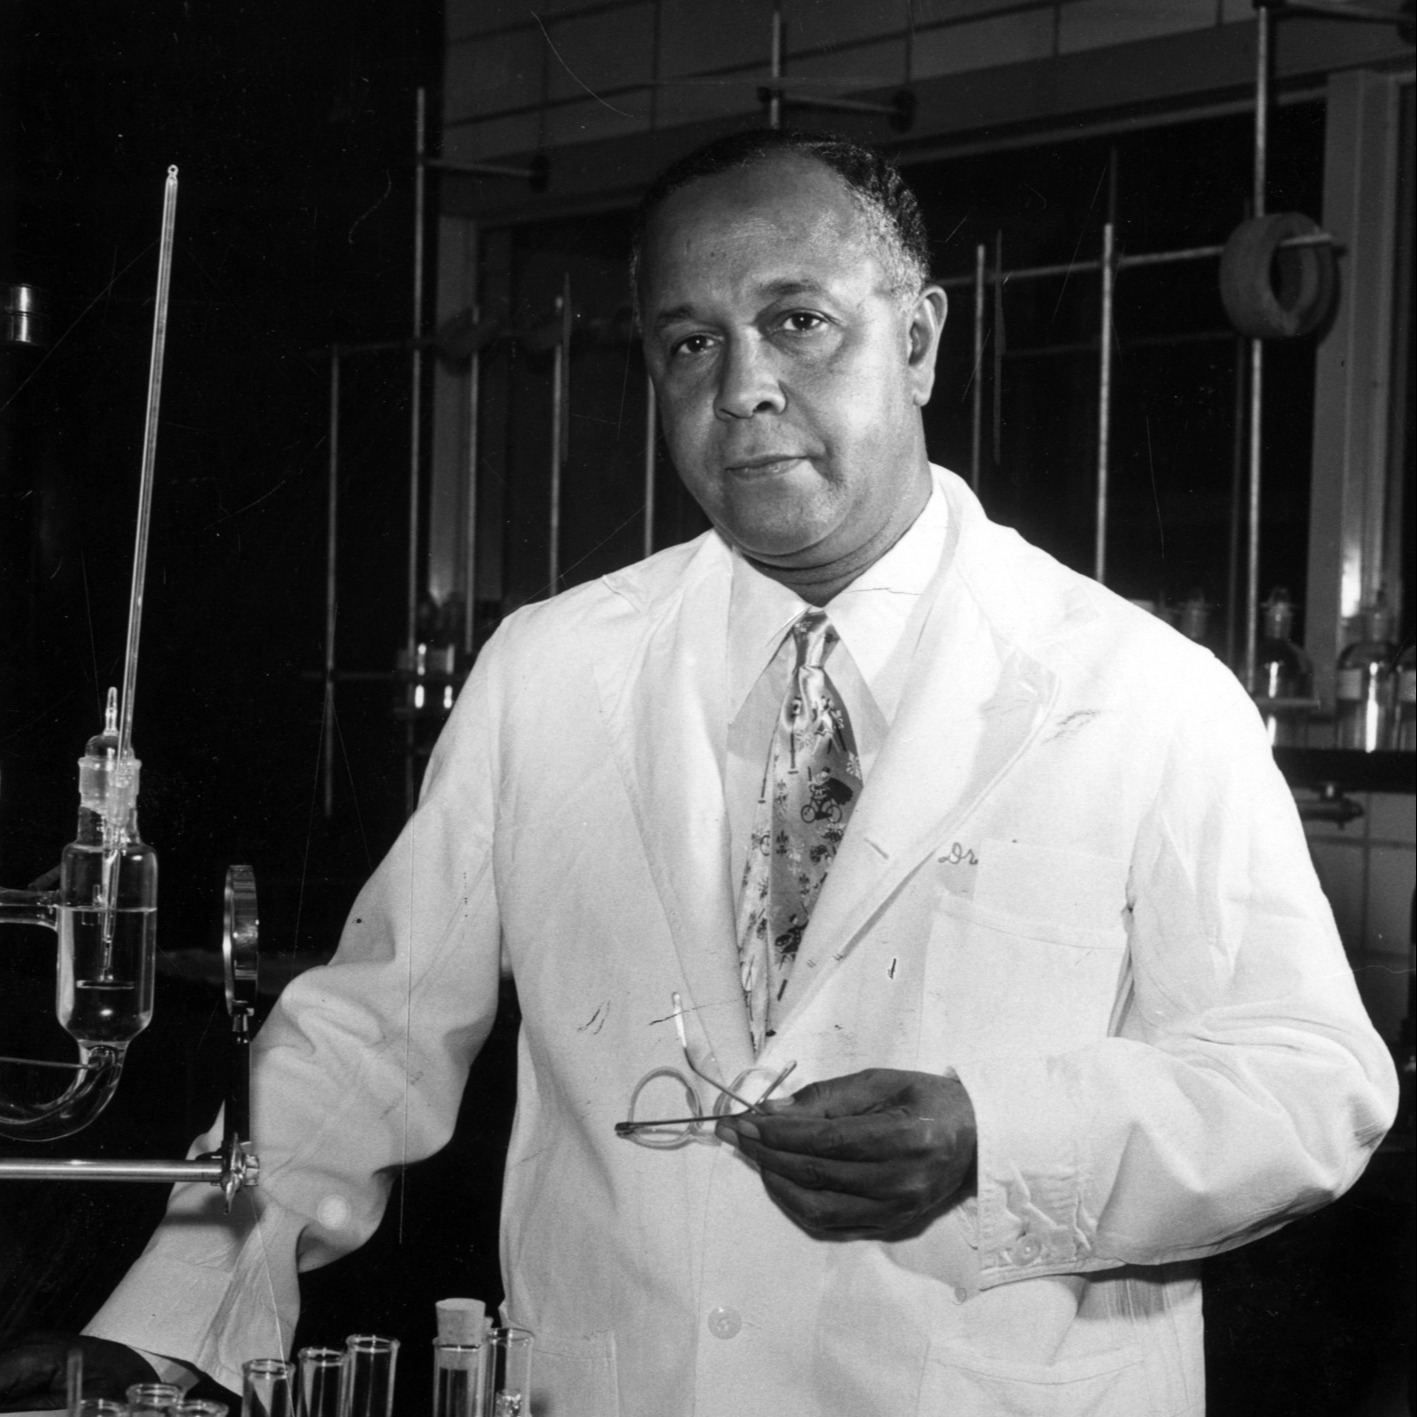 Black and white image of male in laboratory wearing white lab coat and holding glasses